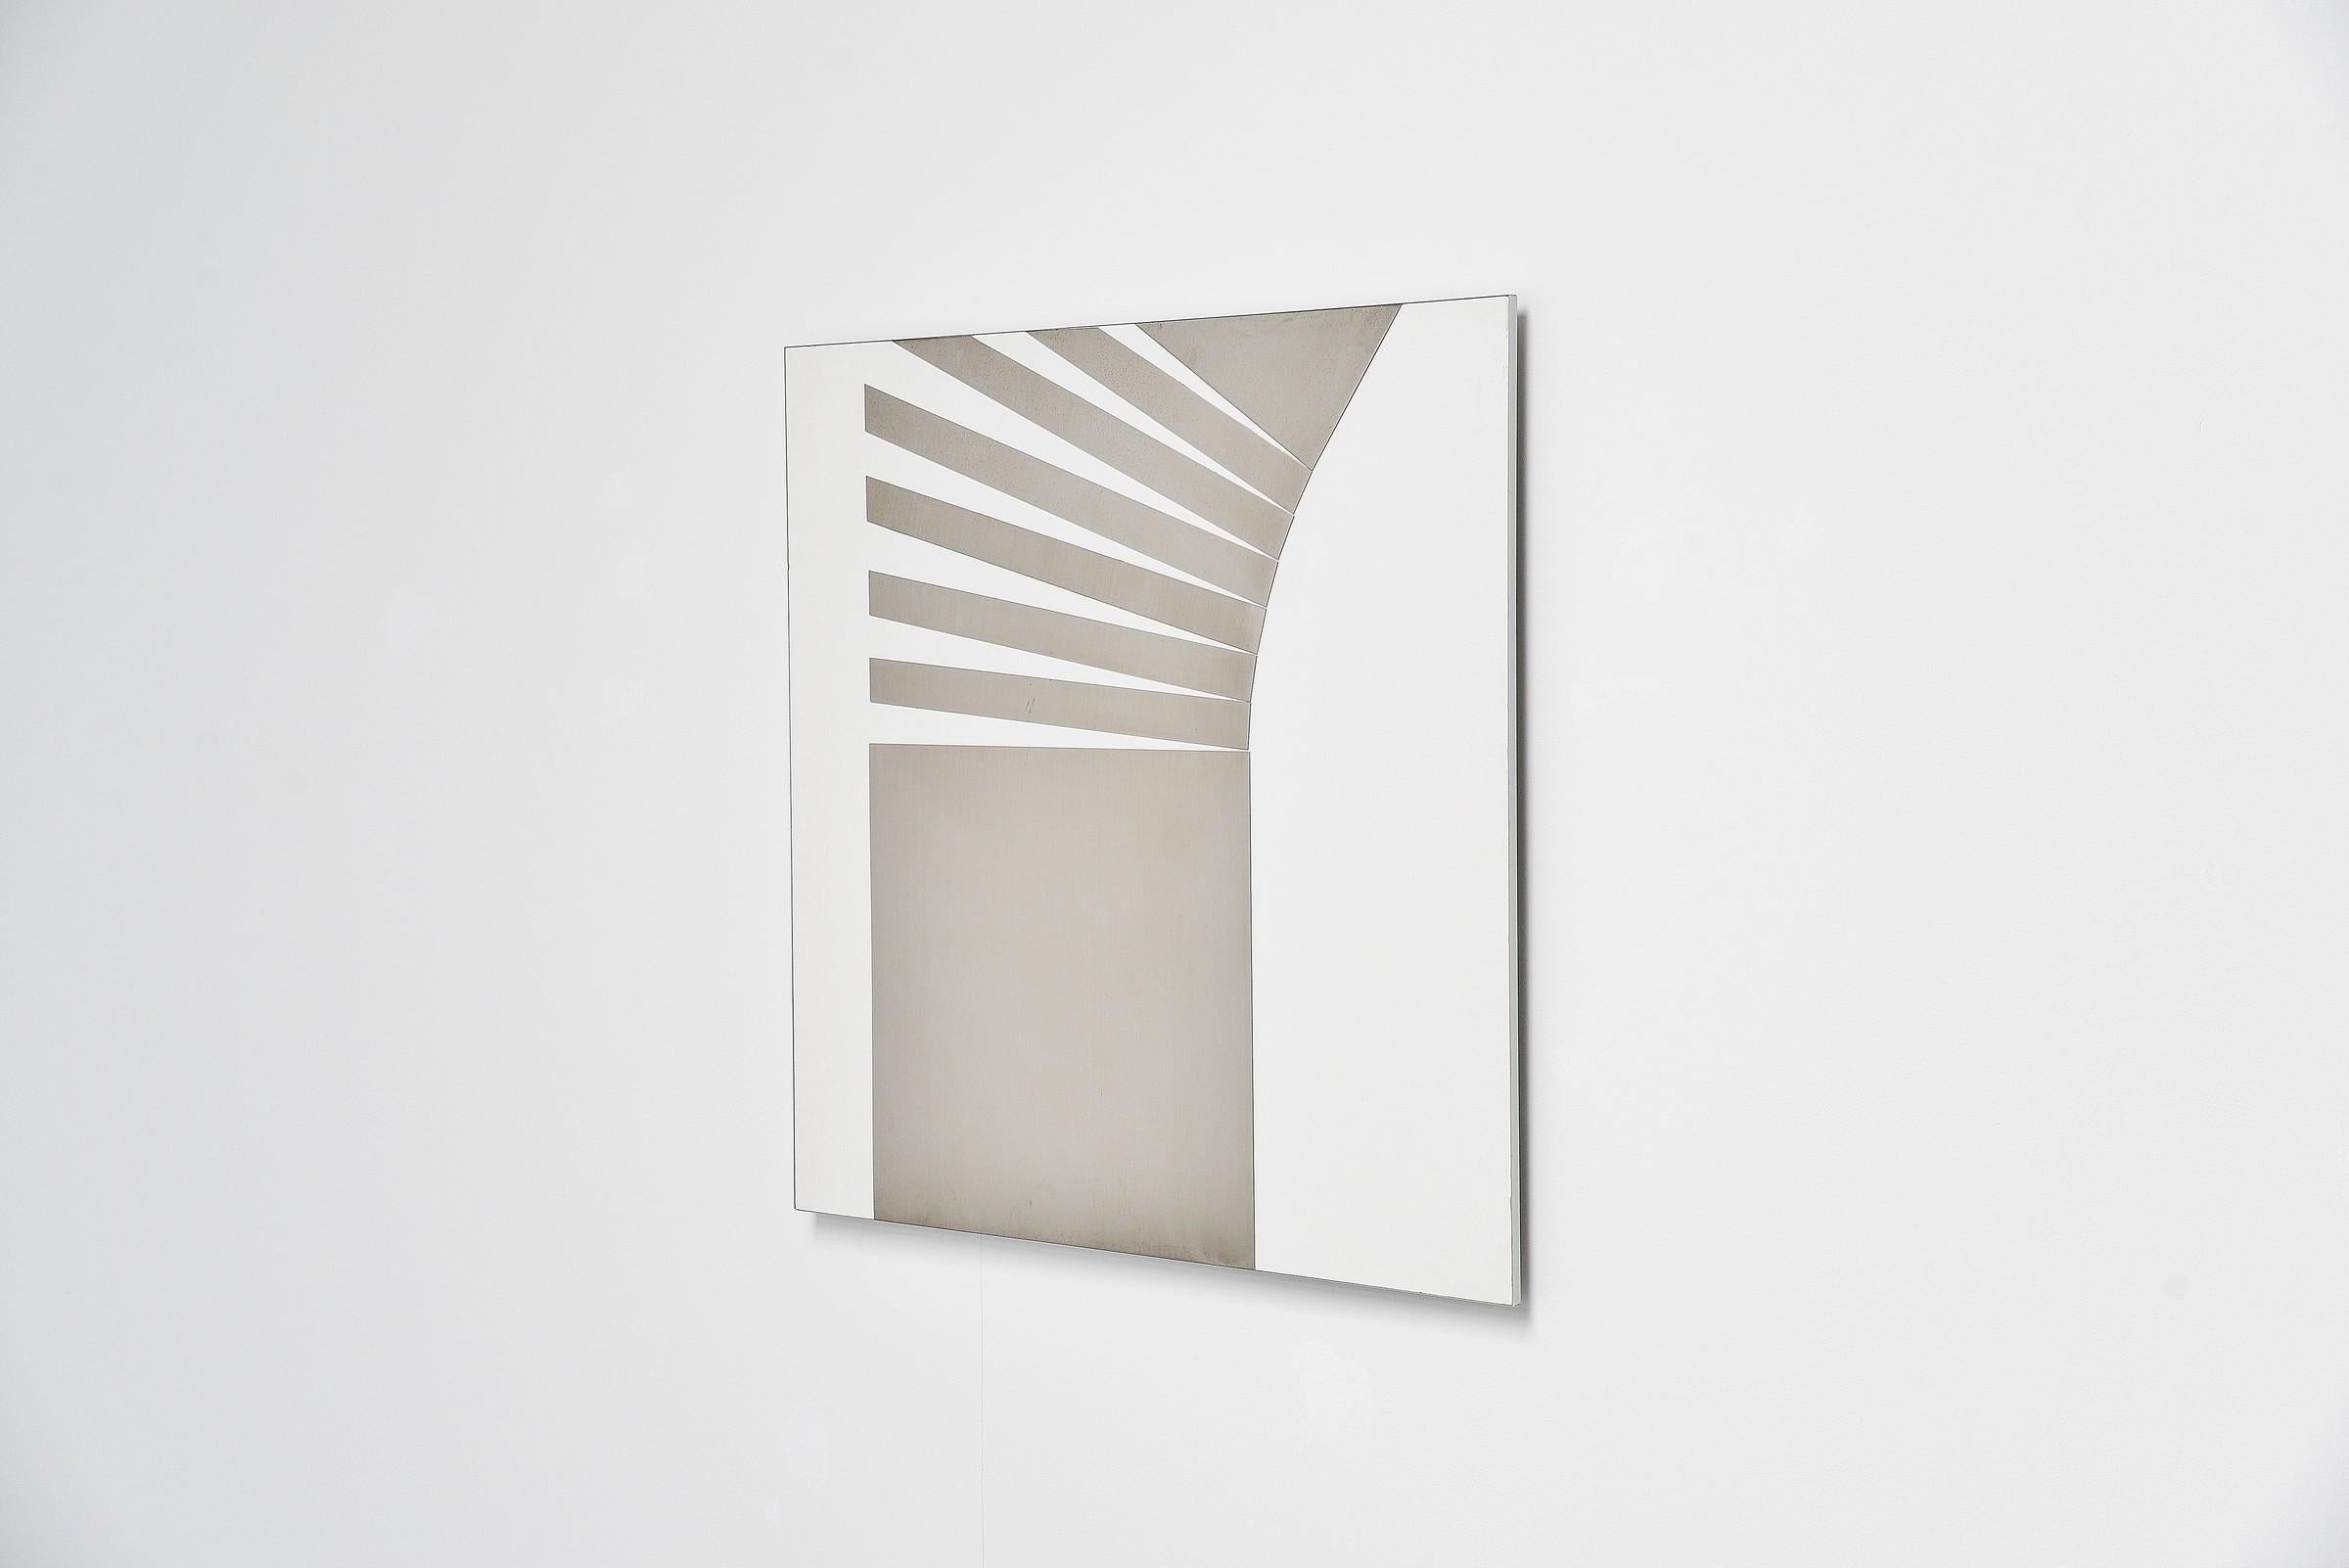 Stunning abstract modern shaped stainless steel wall artwork designed by Rudolf Wolf and manufactured in his own atelier in 1972. This wall panel is made of white laminated board and has stainless steel abstract shapes on it. This artwork is 1 of 10